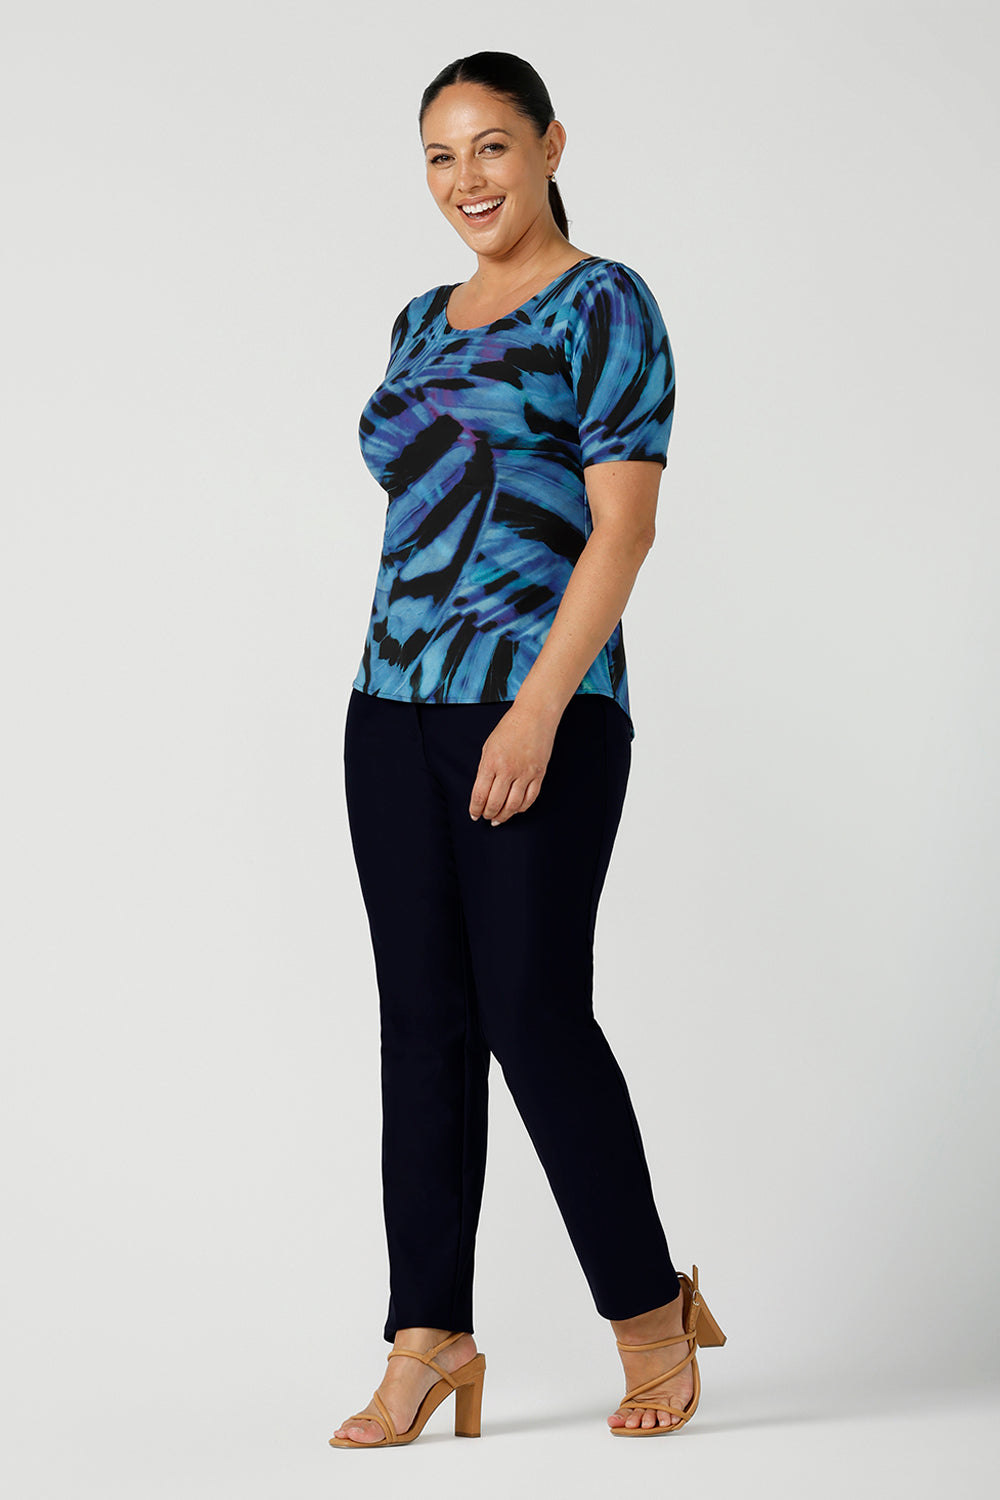 A size 12 woman wearing boat neckline Ziggy top in Flutter. A cobalt and purple print on a black base that is digitally printed. Made in Australia in soft Jersey with elbow length sleeves. A great work to weekend top. Size 8 - 24. Styled back with black slim fit Brooklyn pants and heels.